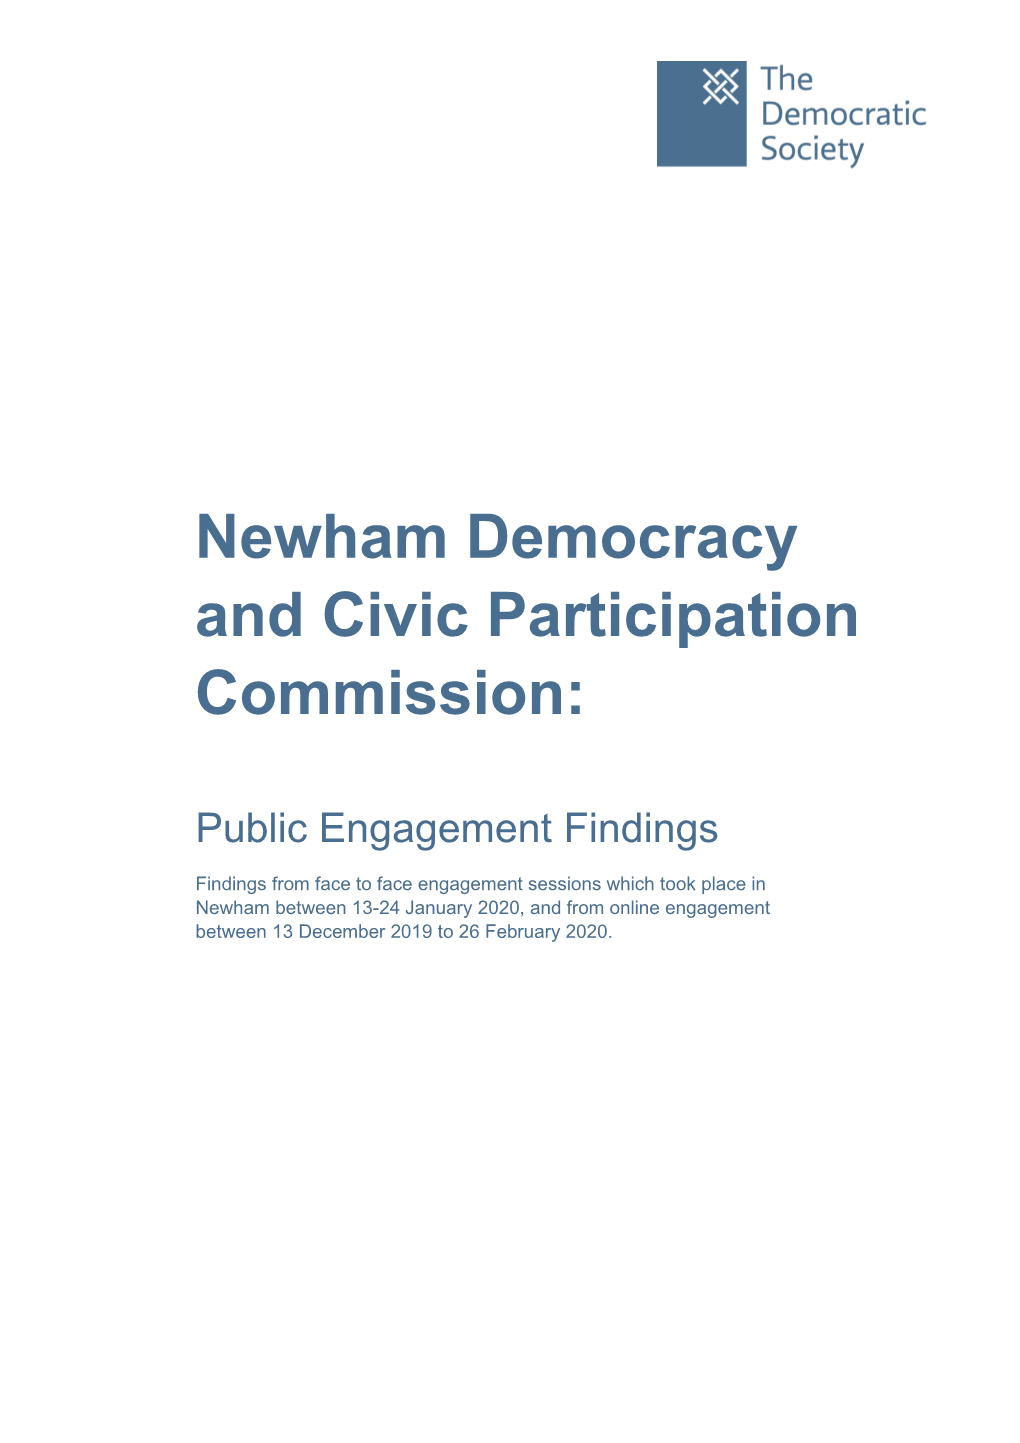 Newham Democracy and Civic Participation Commission